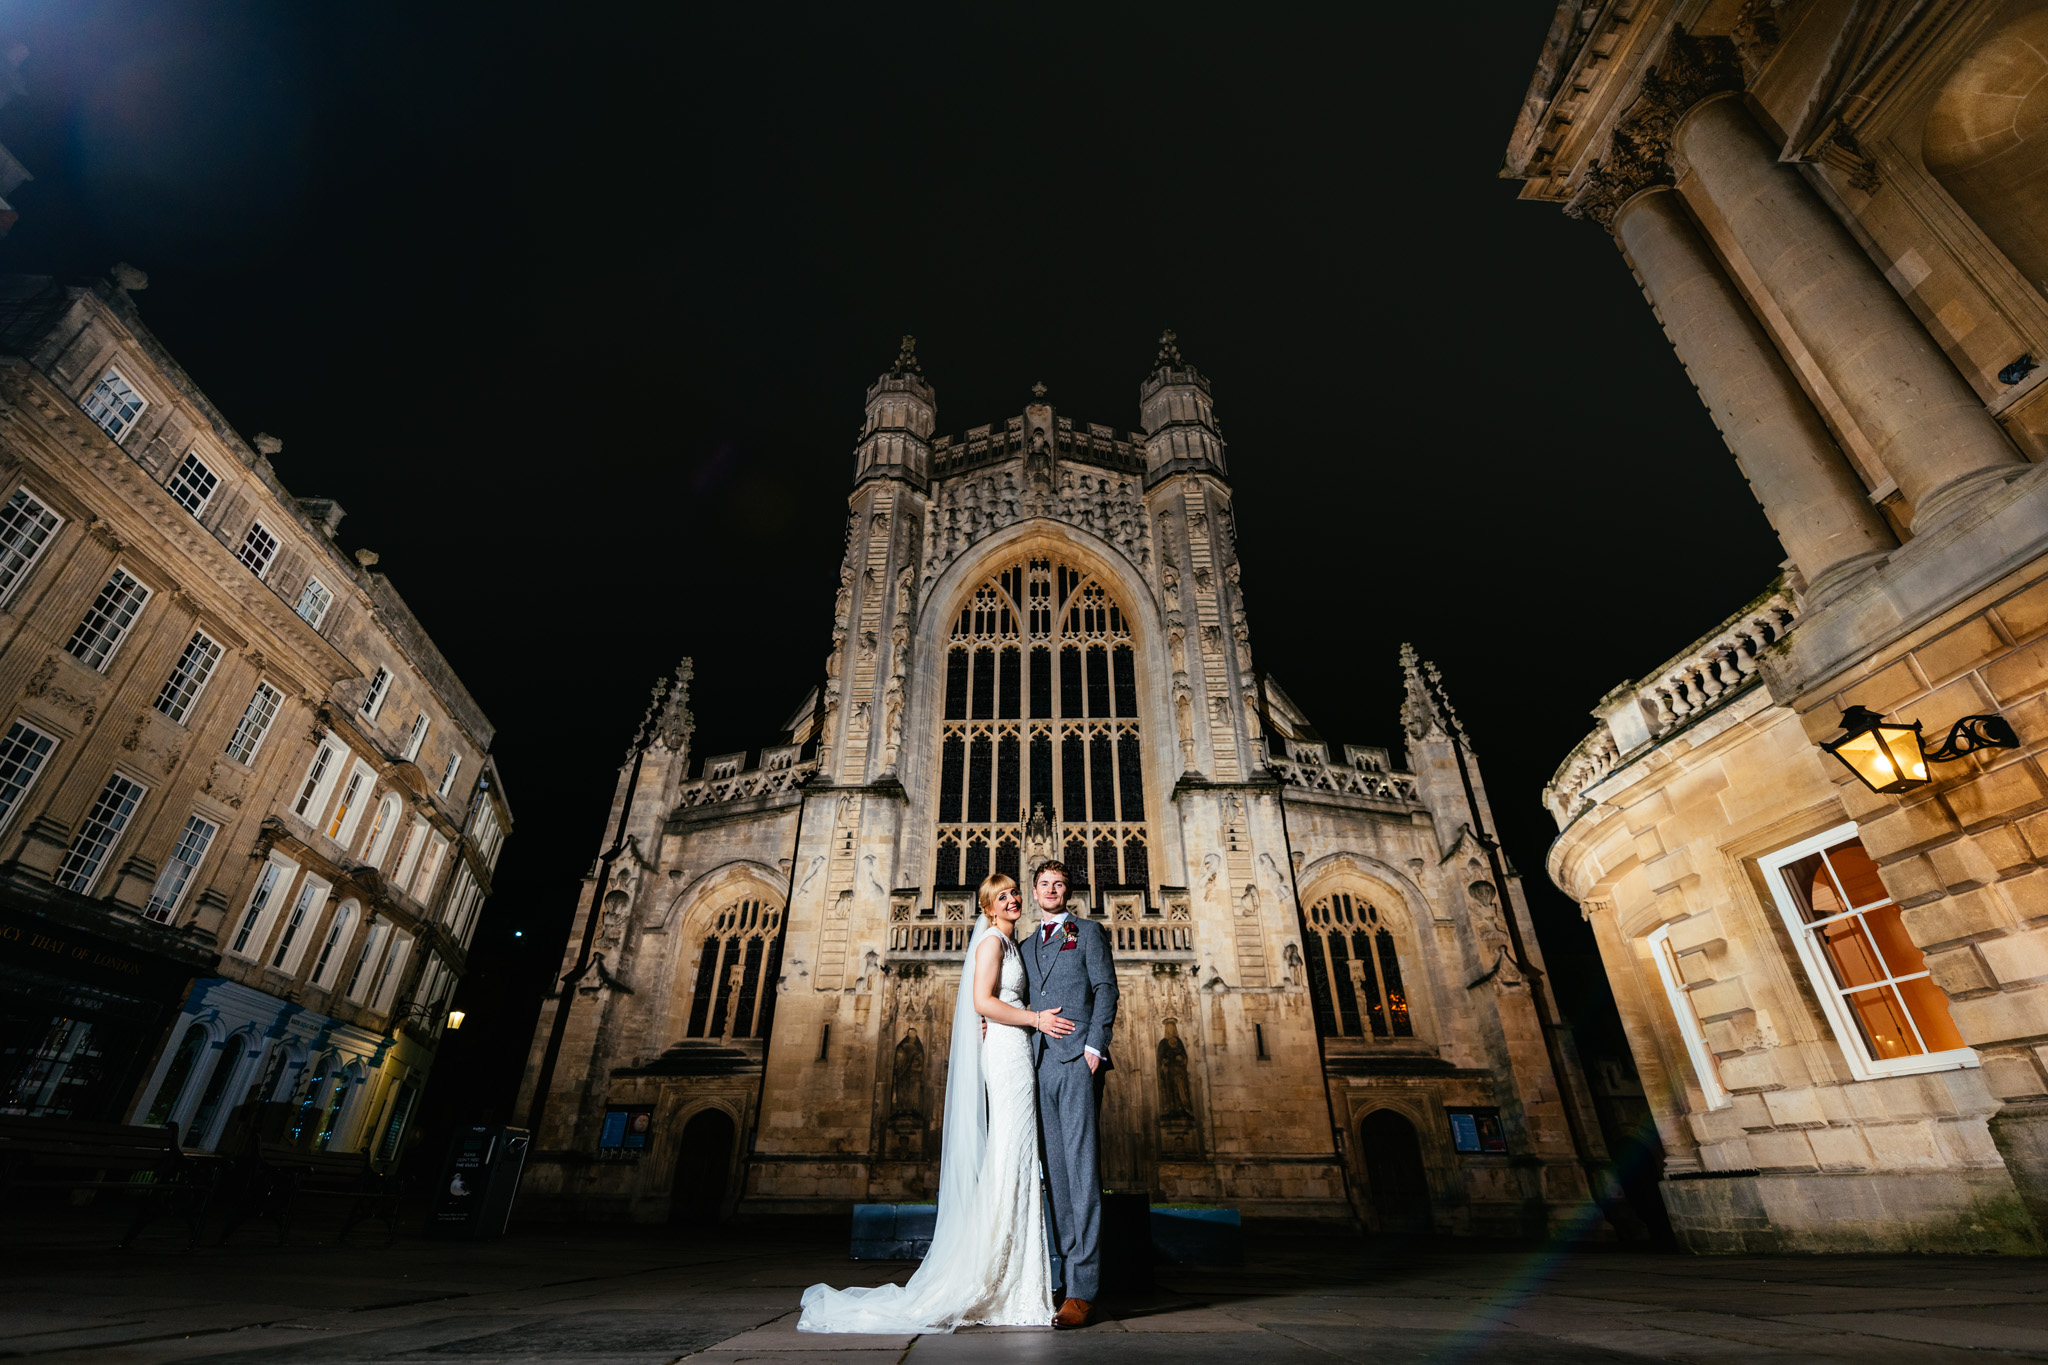 South Wales Wedding Photographers -OM- 001 – NIKON D810 14 mm 1-125 sec at f – 2.8 ISO 400